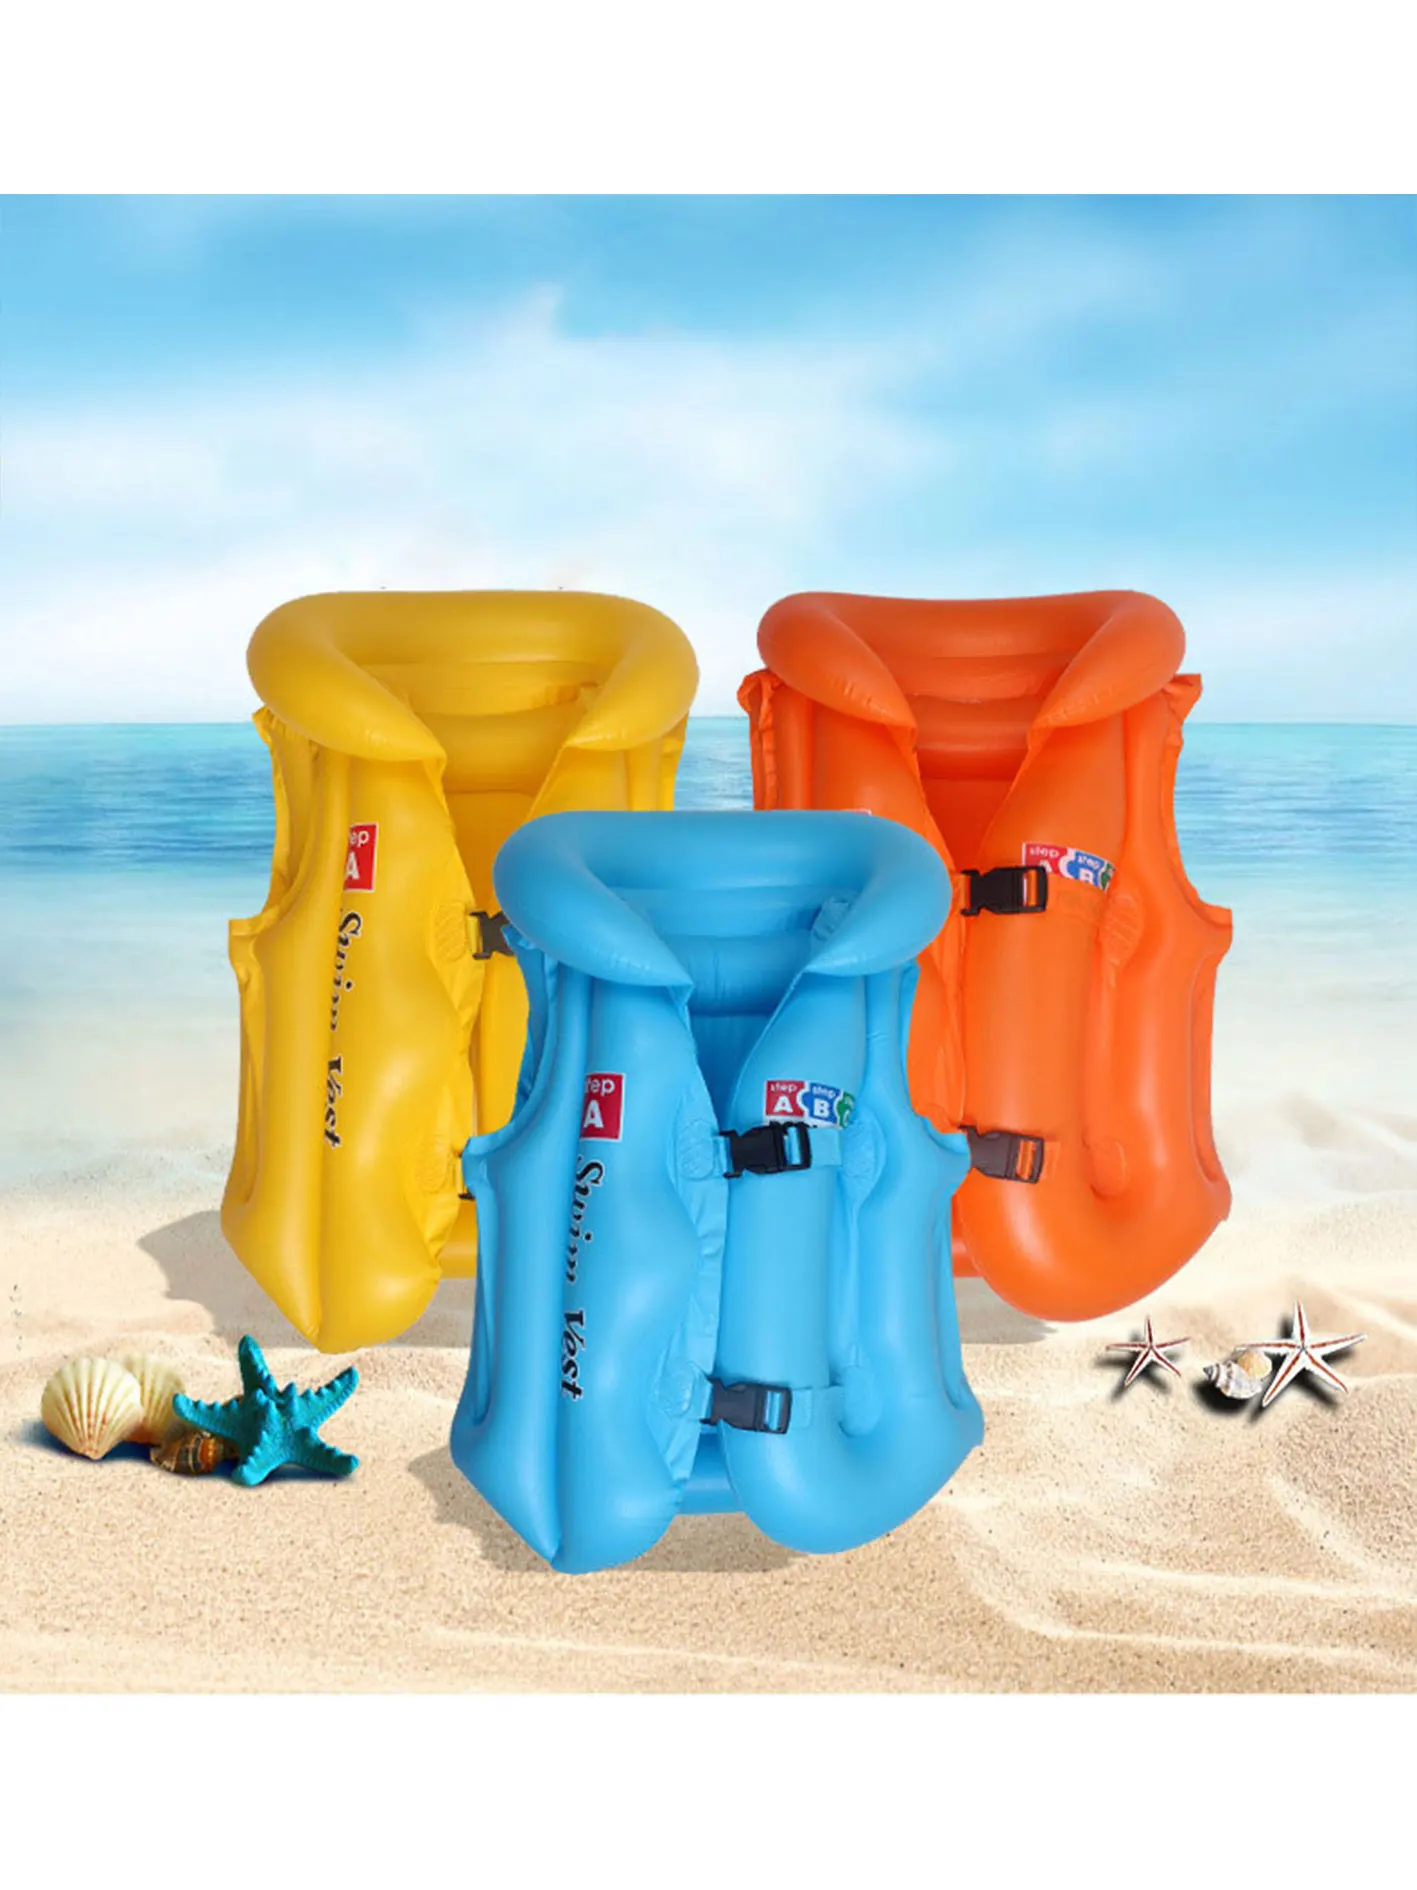 Kids Simple Atmosphere Life Jackets Inflatable Children Swimwear For Water Sport Boating Swimming Pool Accessories white noise baby comfort sleeping aid instrument children s music sleeping sleeping aid instrument led atmosphere night light